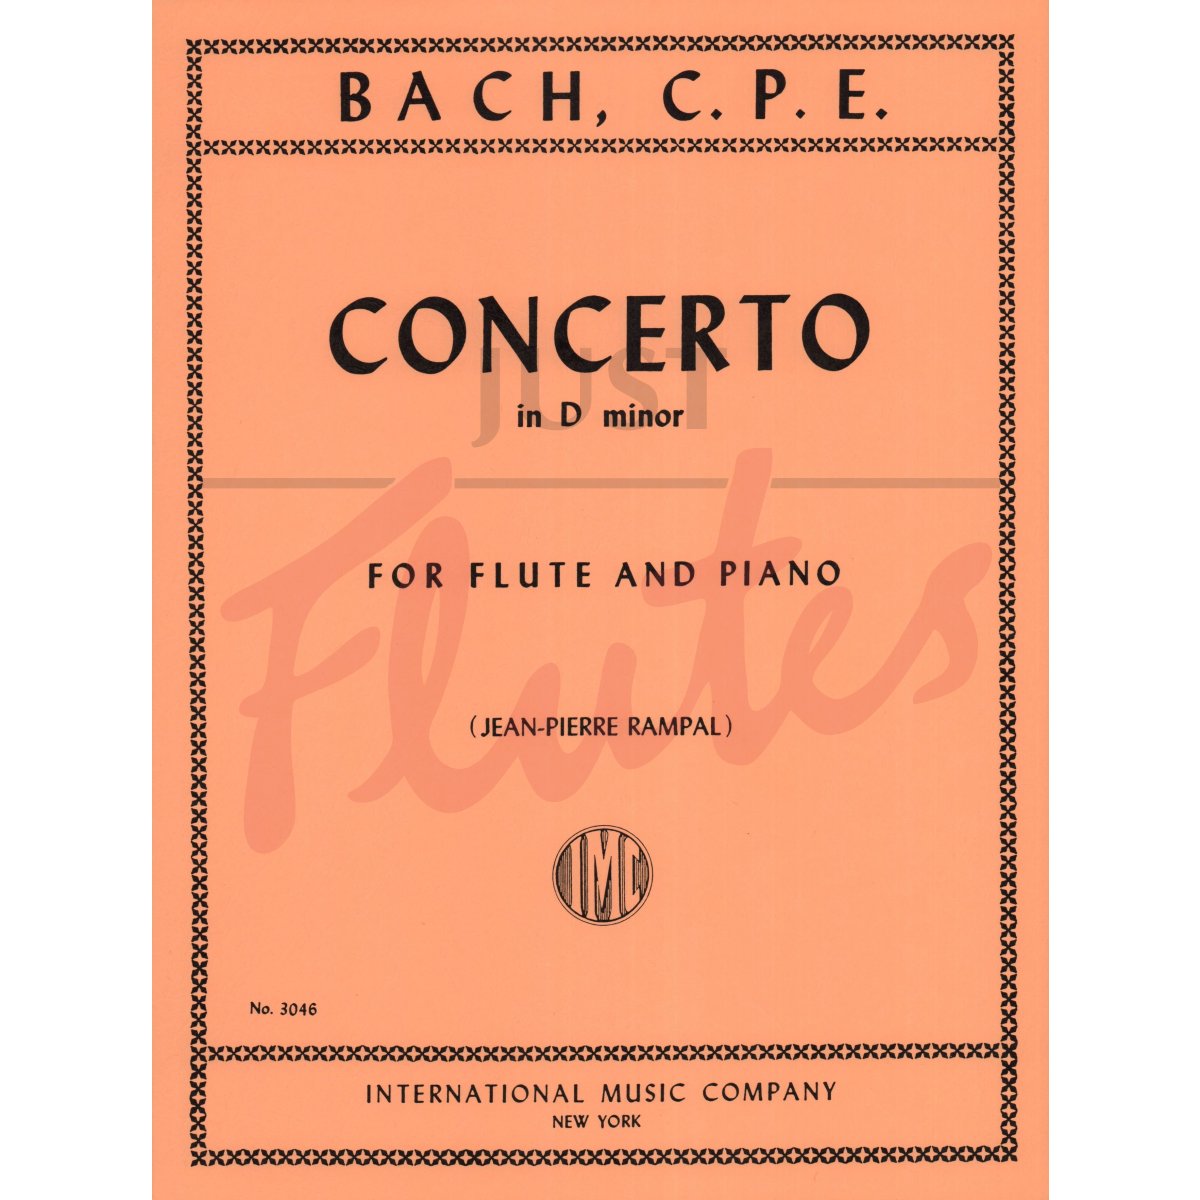 Concerto in D minor for Flute and Piano